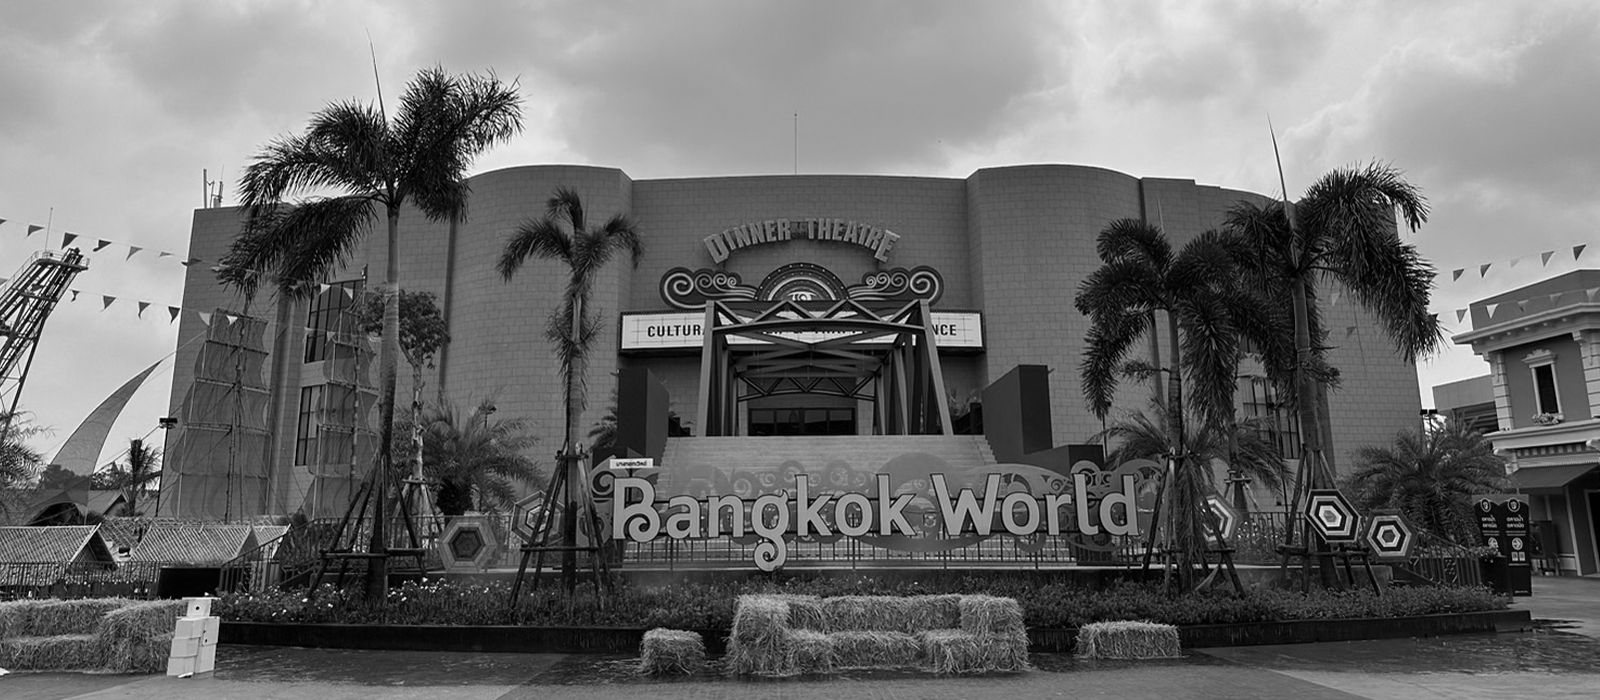 Overview of Bangkok World Building in Siam Amazing Park